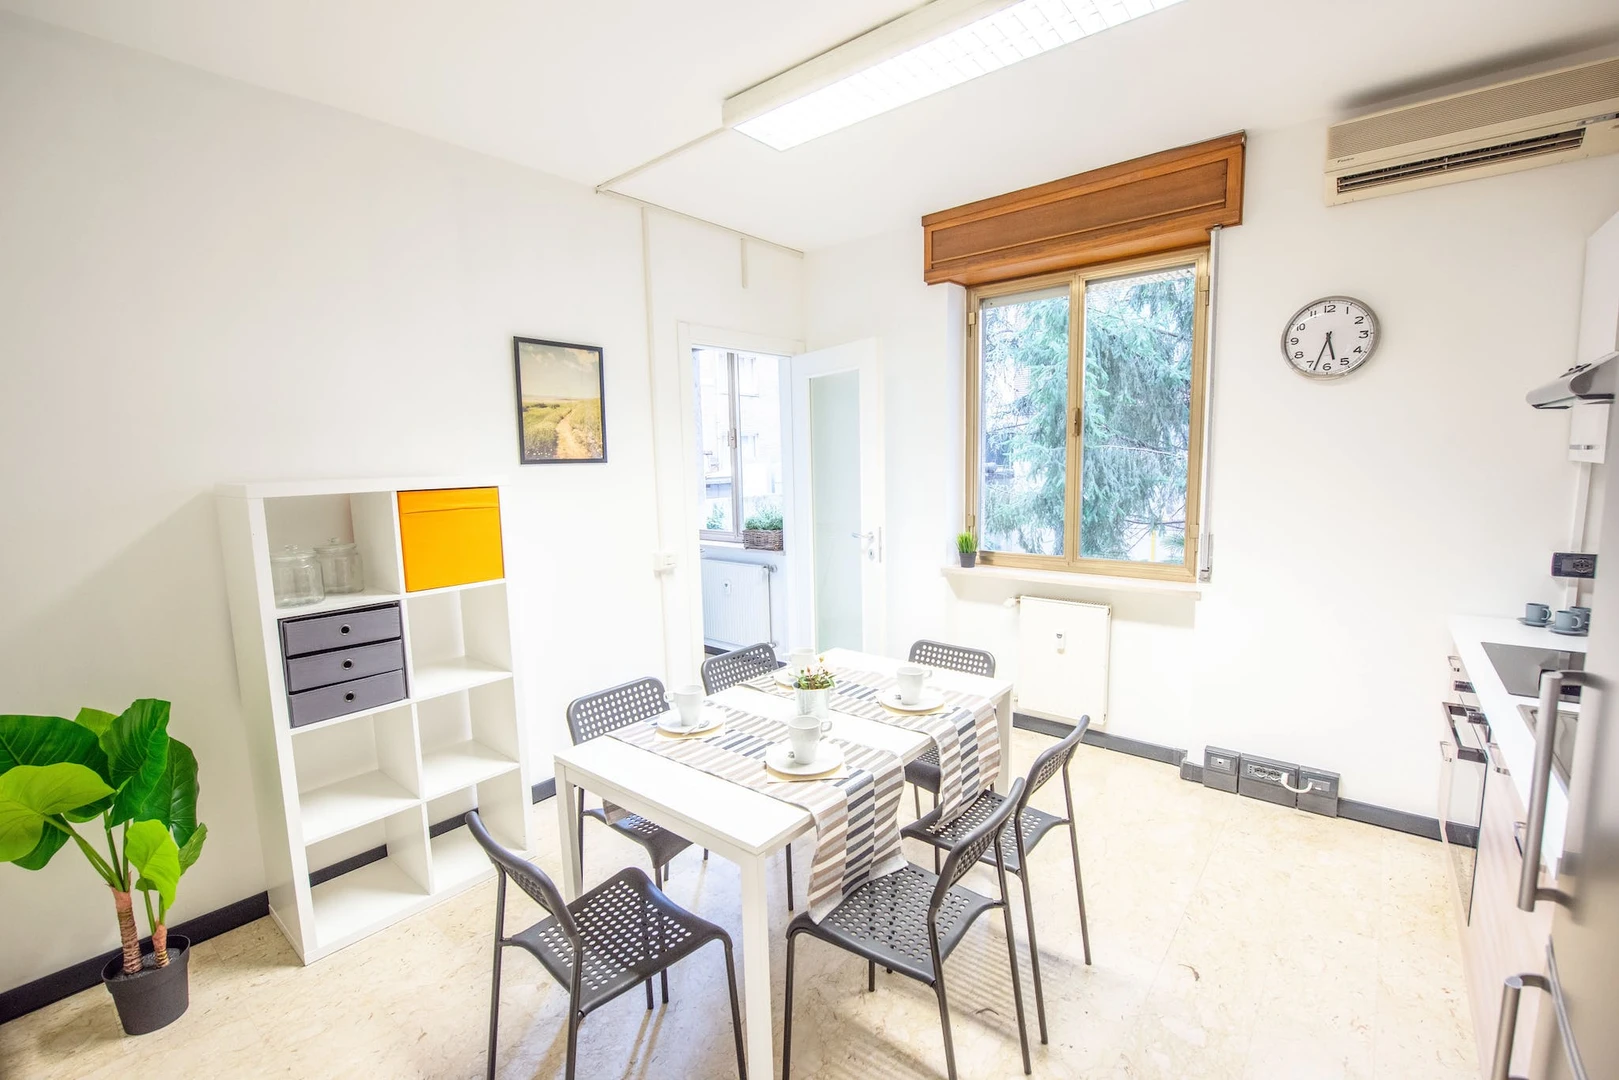 Cheap private room in Udine